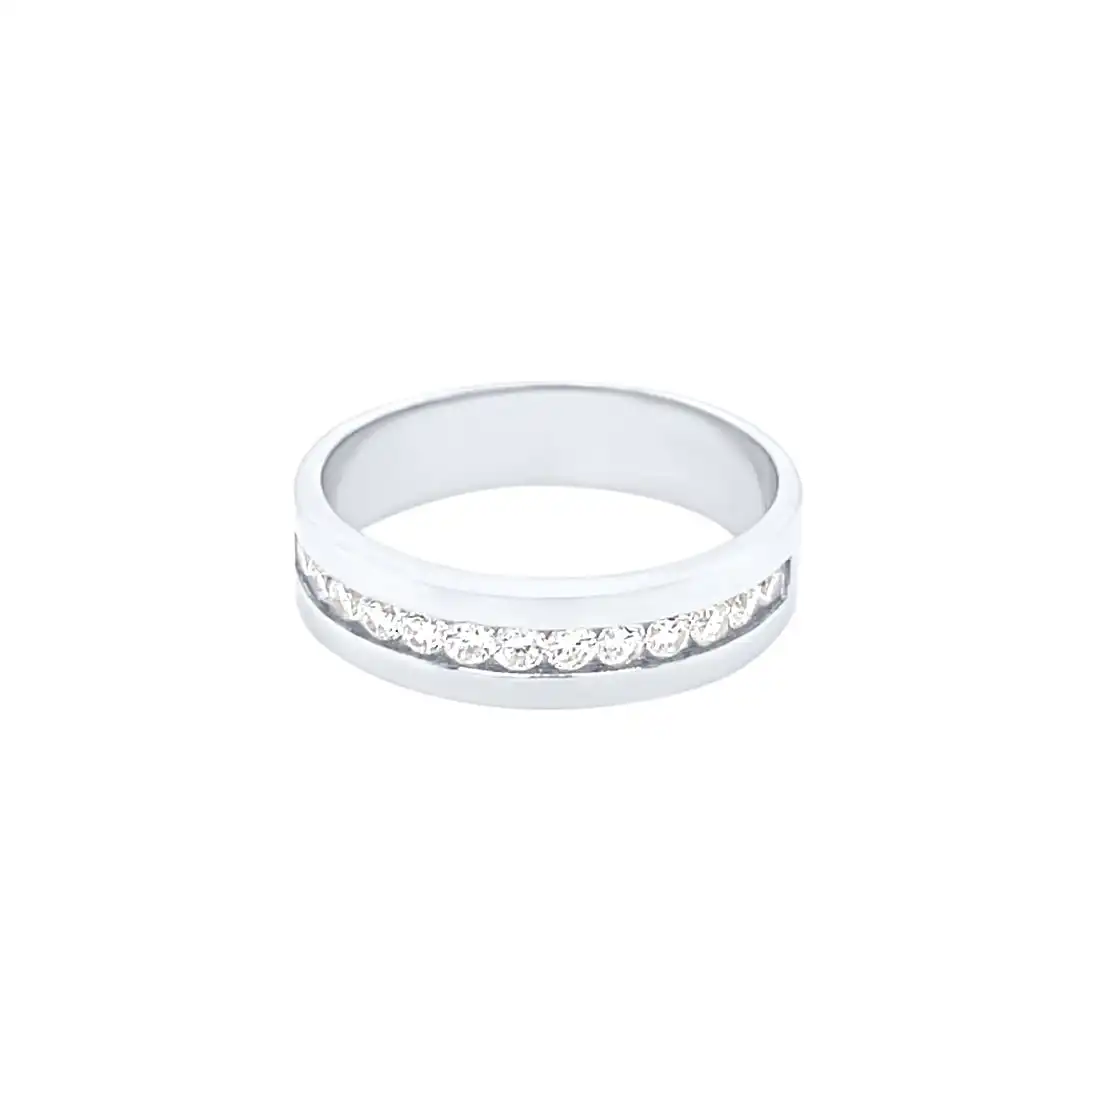 Sterling Silver Channel Ring with Cubic Zirconia